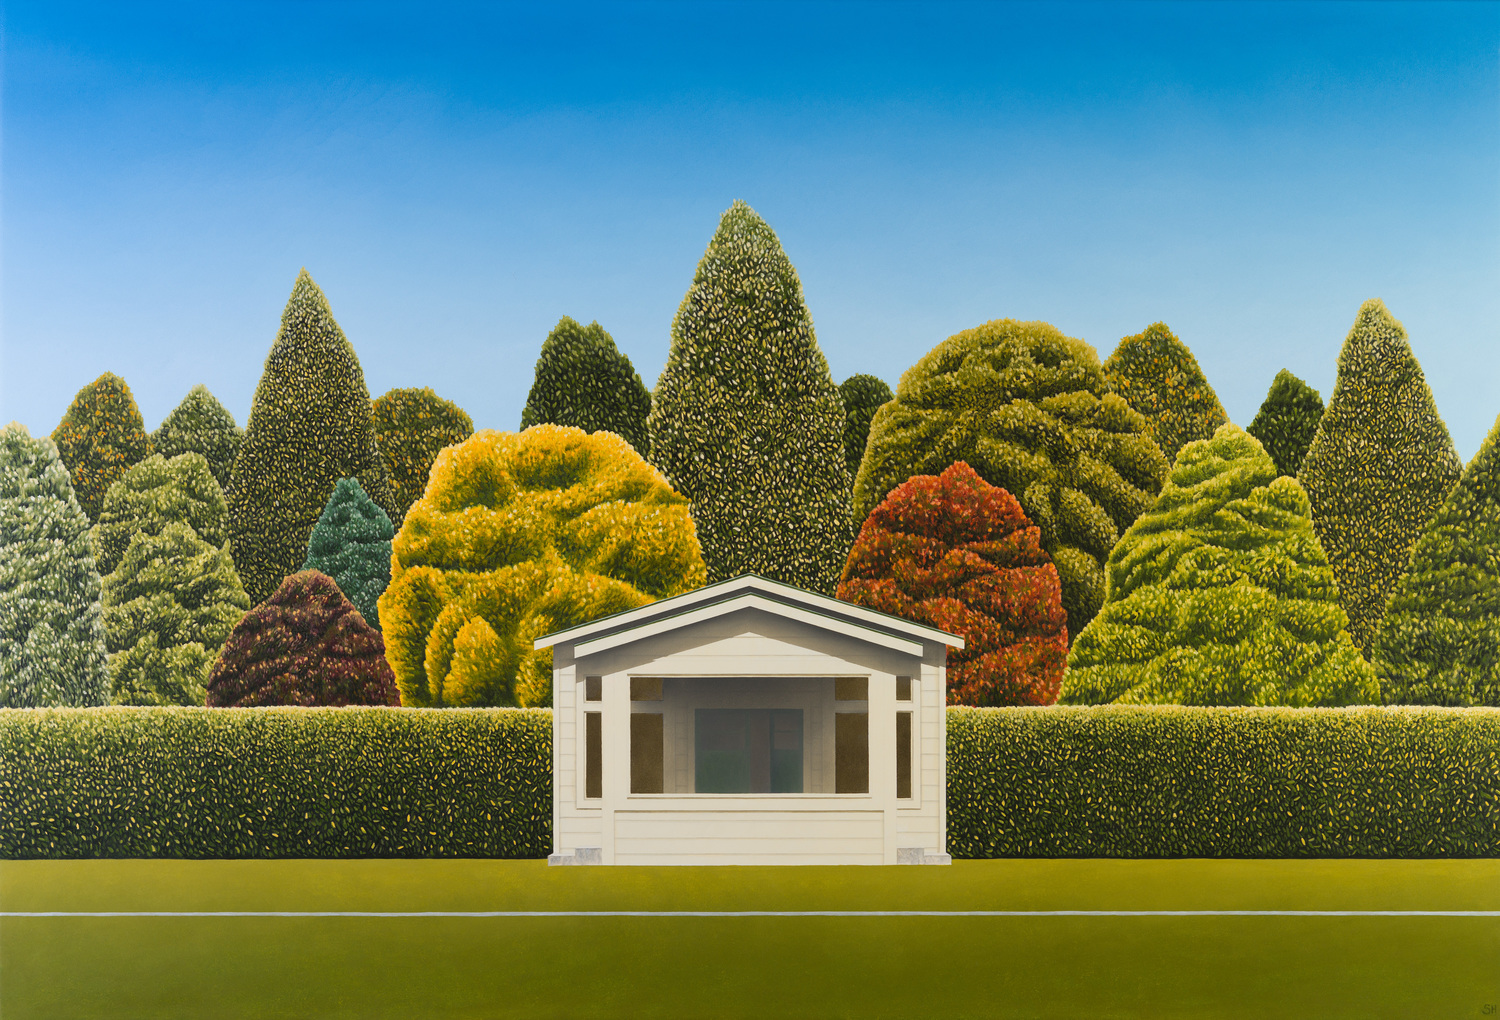 Club House in the Park by Stephen Howard Parnell Gallery